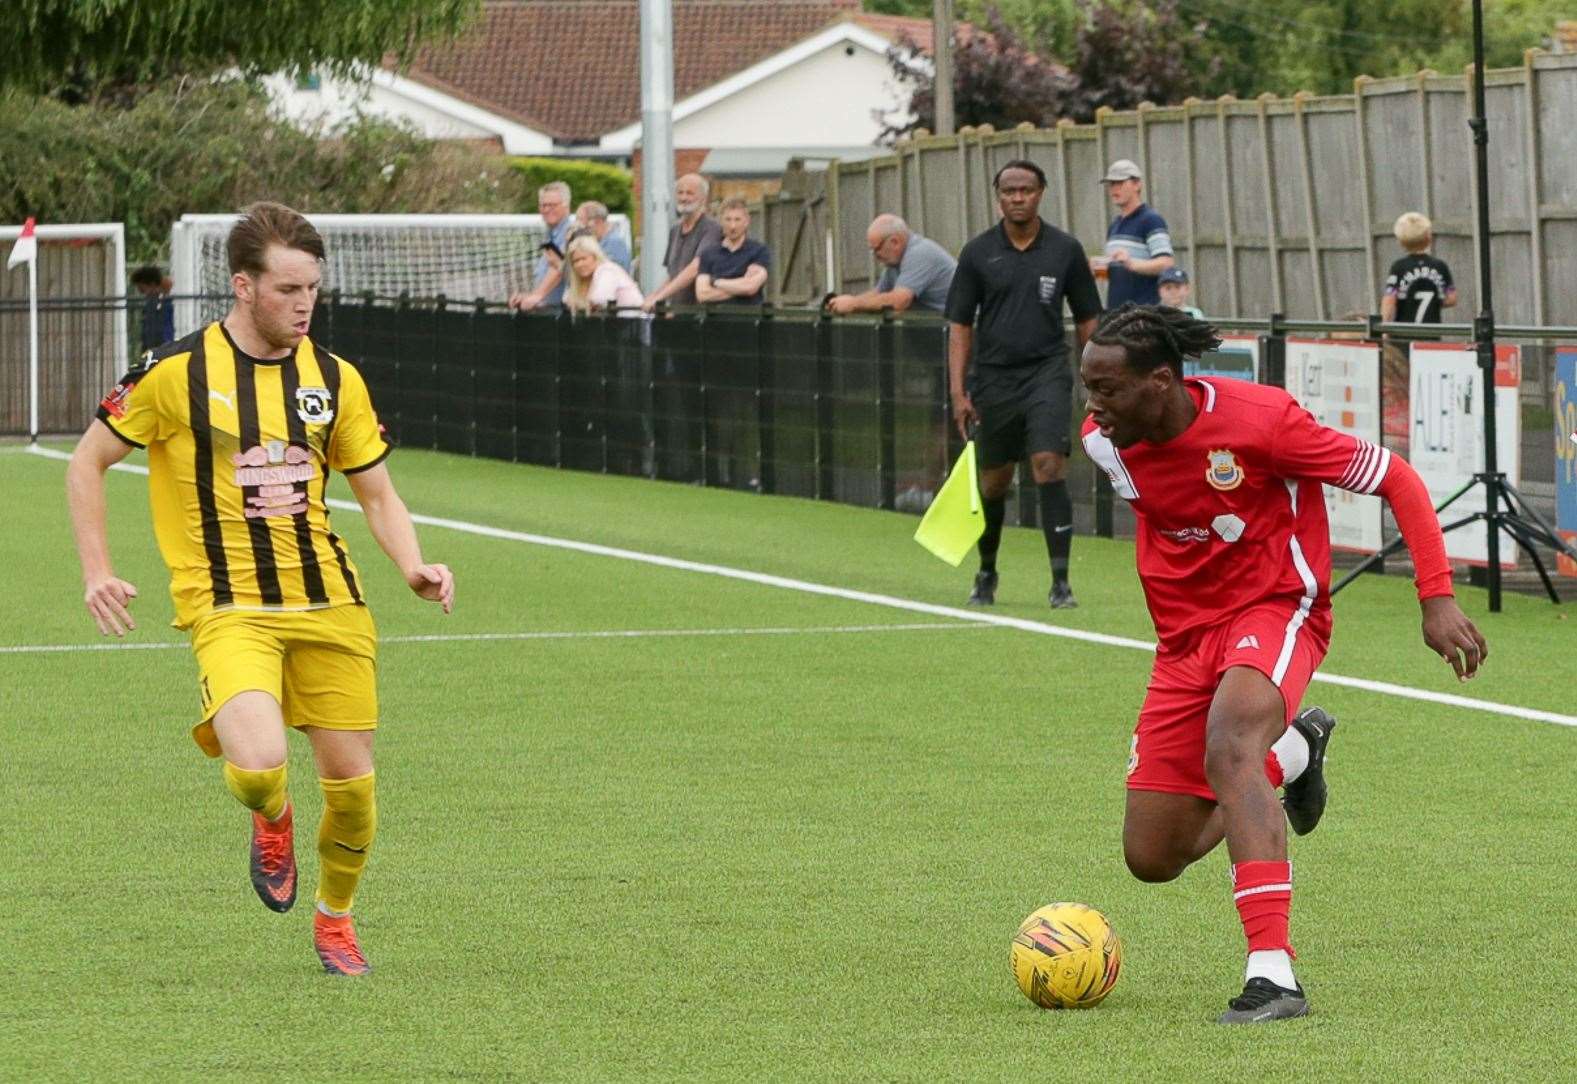 Whitstable's Eri-Oluwa Akintimehin looking good on the ball. Picture: Les Biggs